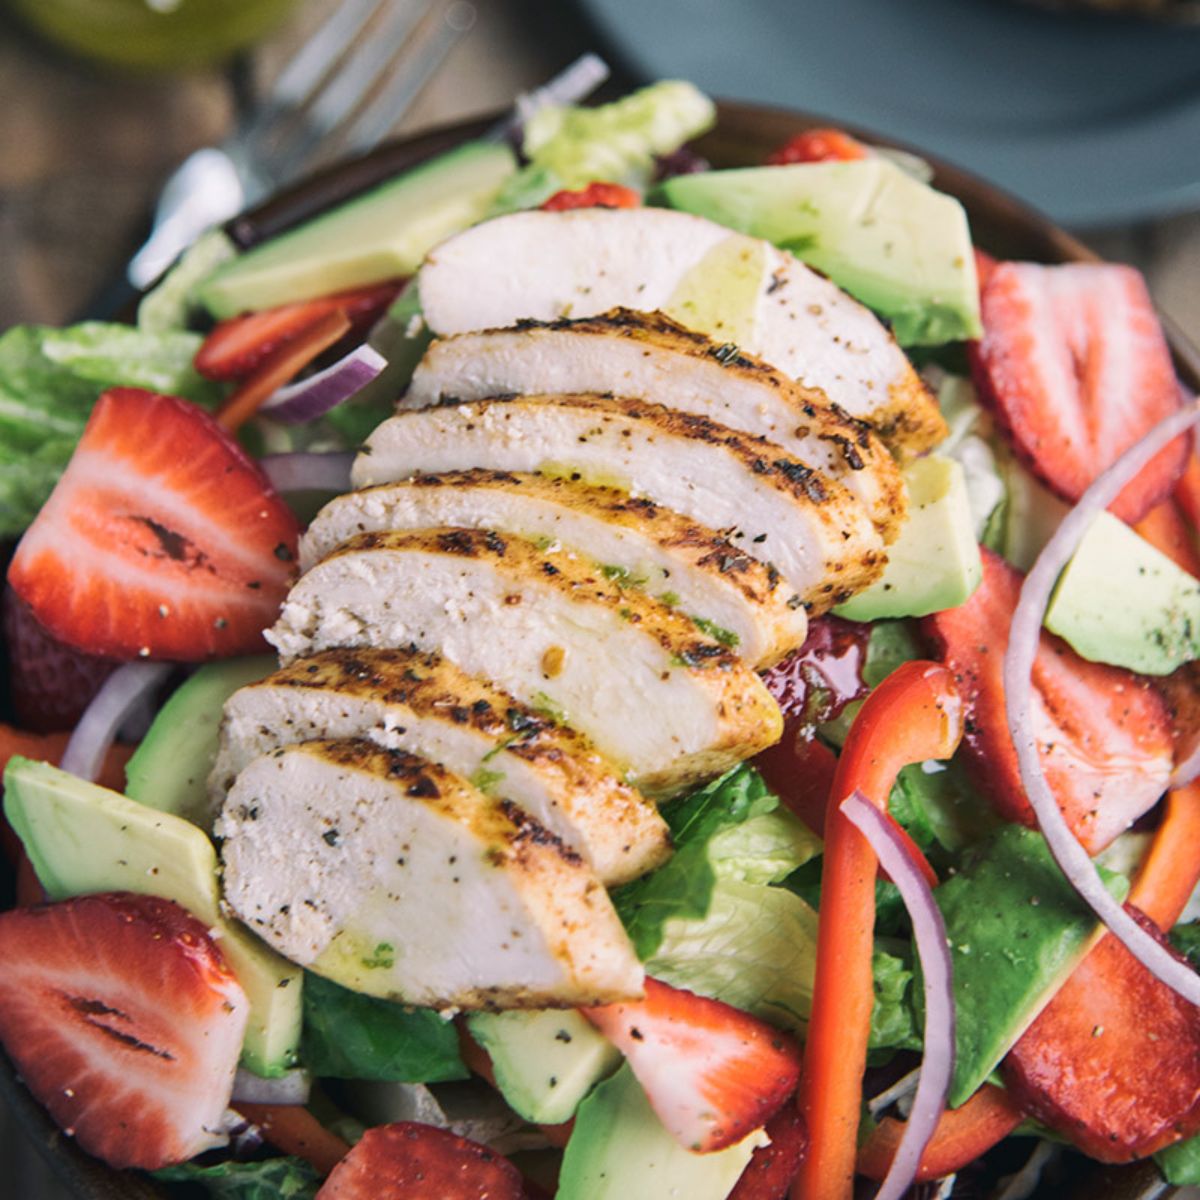 Tuscan Grilled Chicken With Strawberry Salad on a plate.